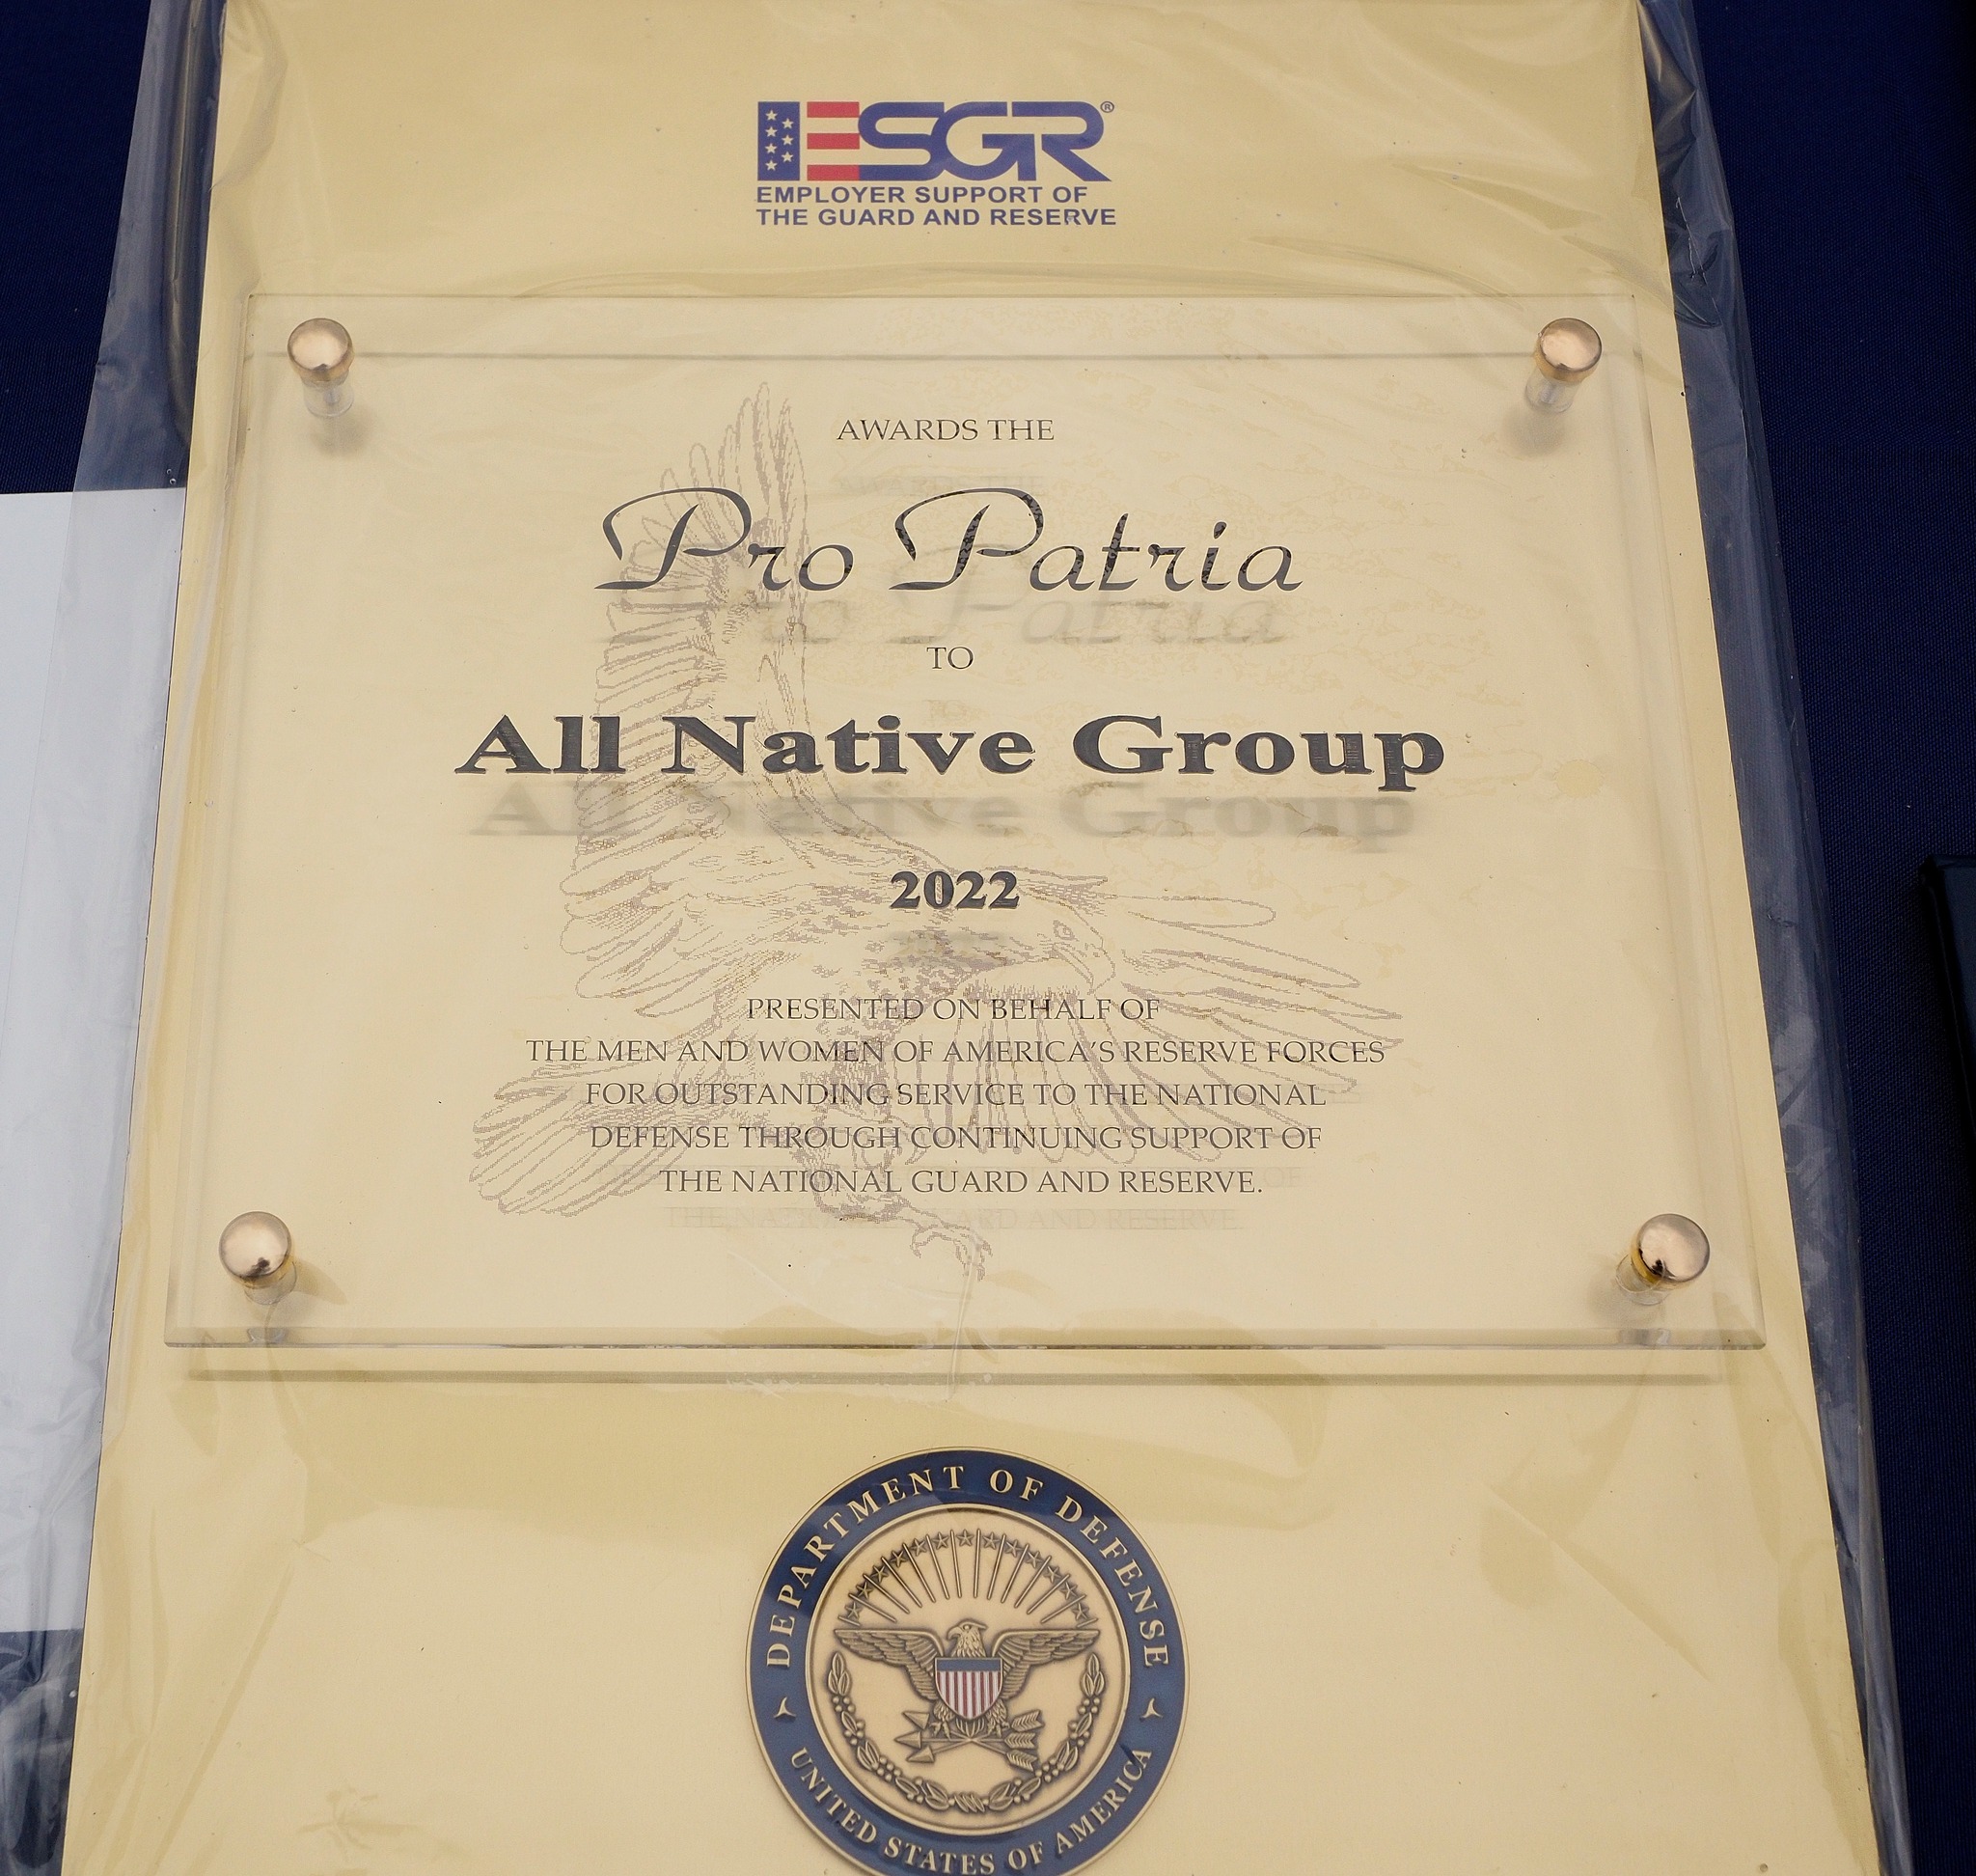 The Employer Support of the Guard and Reserve (ESGR) Pro Patria award for Nebraska was presented to the All Native Group (ANG) Team Members